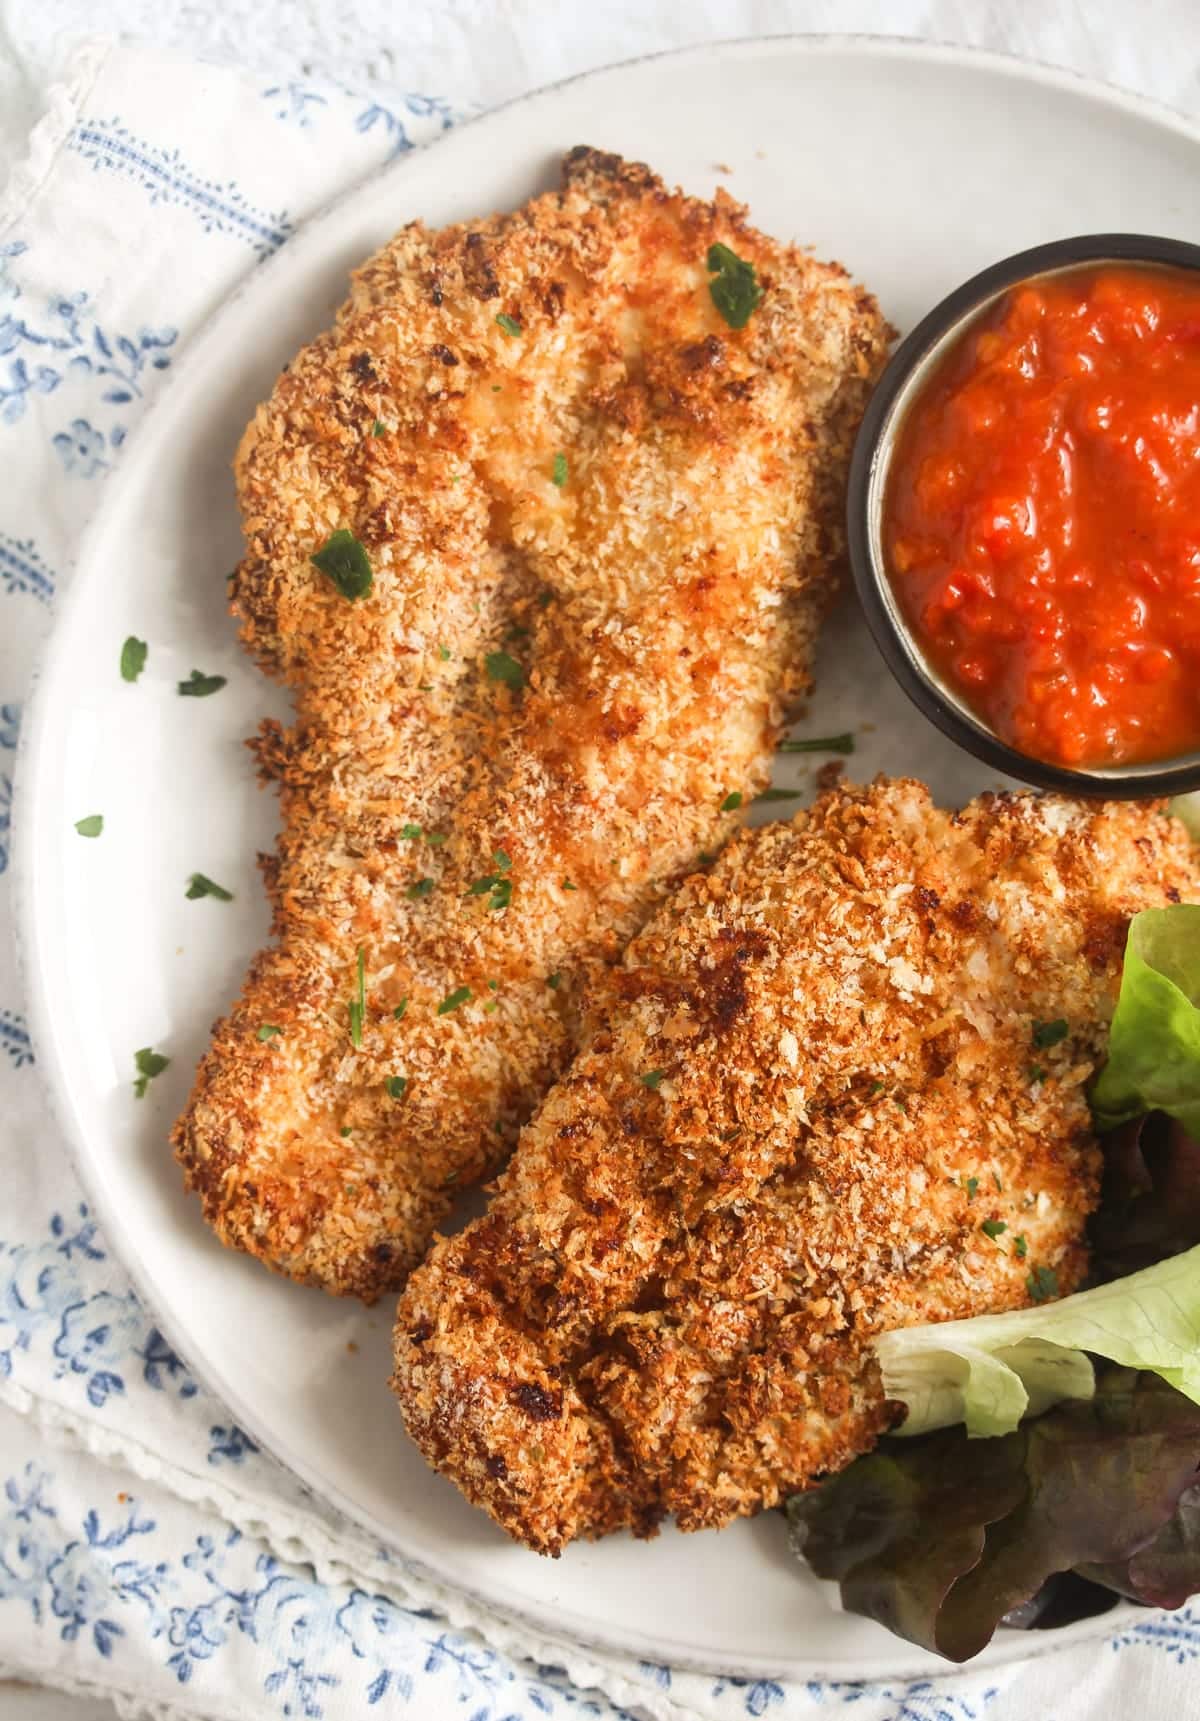 crispy panko chicken breast slices with chili dip and salad leaves.